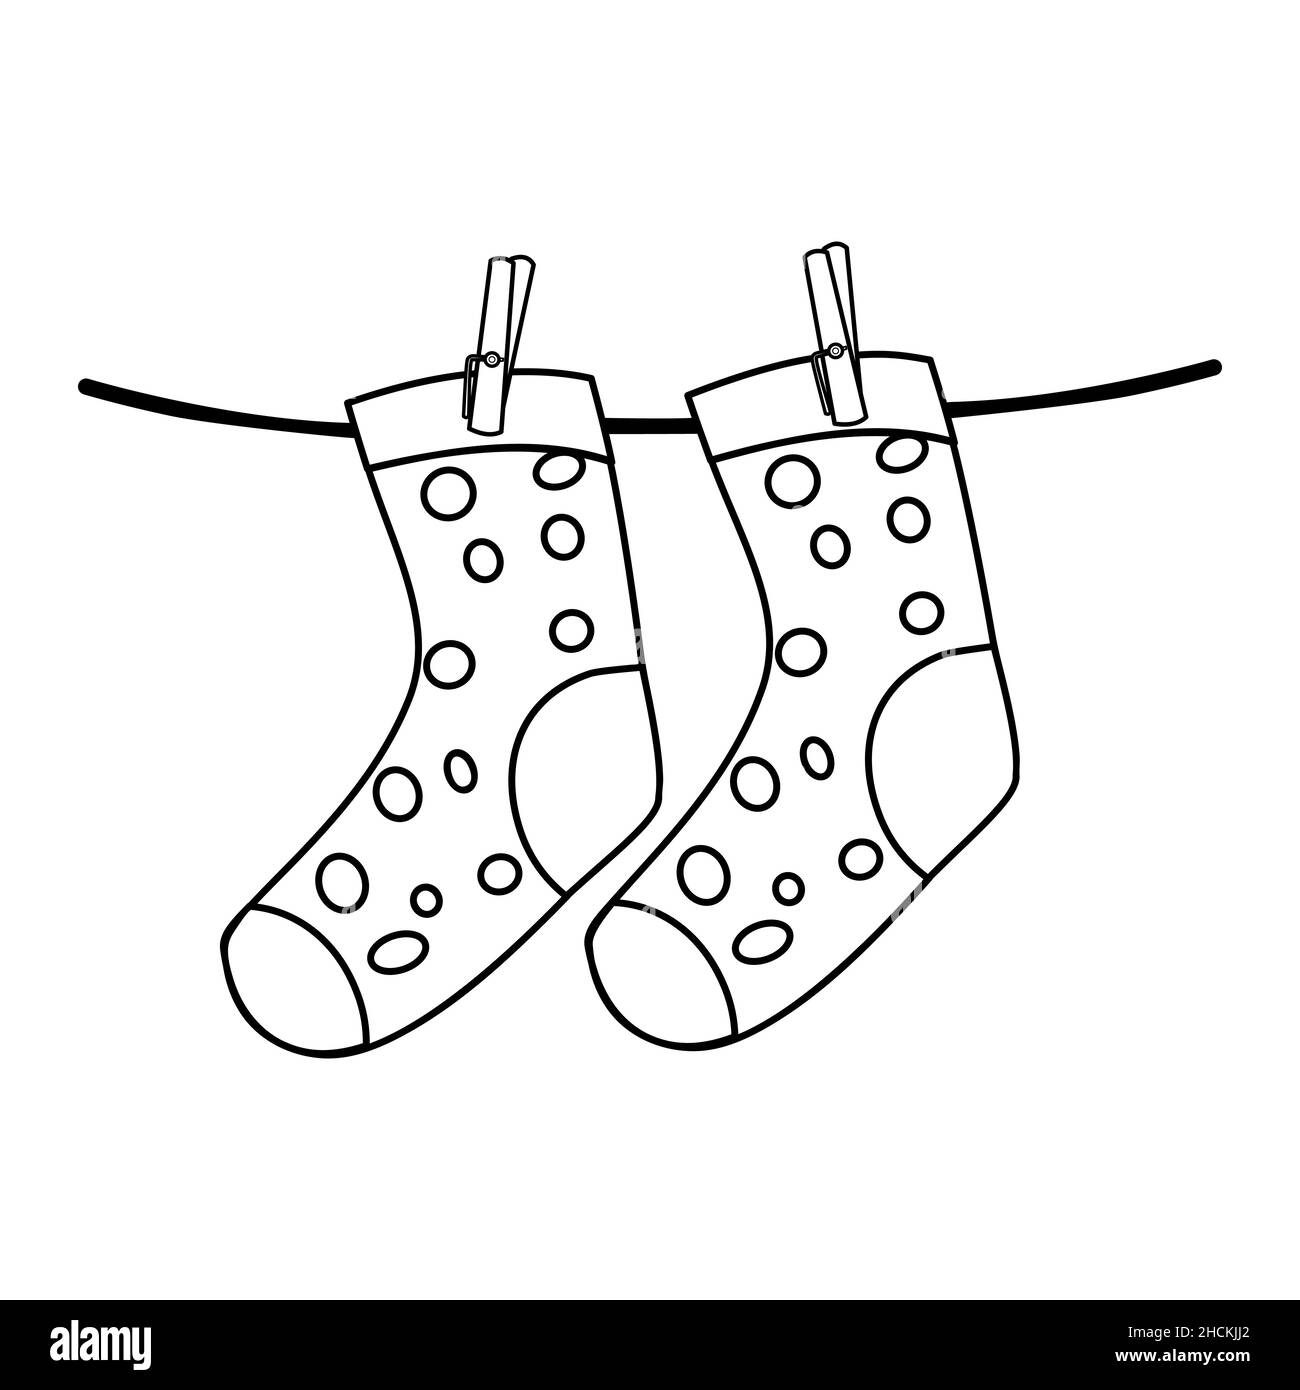 Socks on clothespin icon isolated on white background.Socks hanging on clothesline.Simple line laundry drying sign, contour symbol.Vector illustration Stock Vector